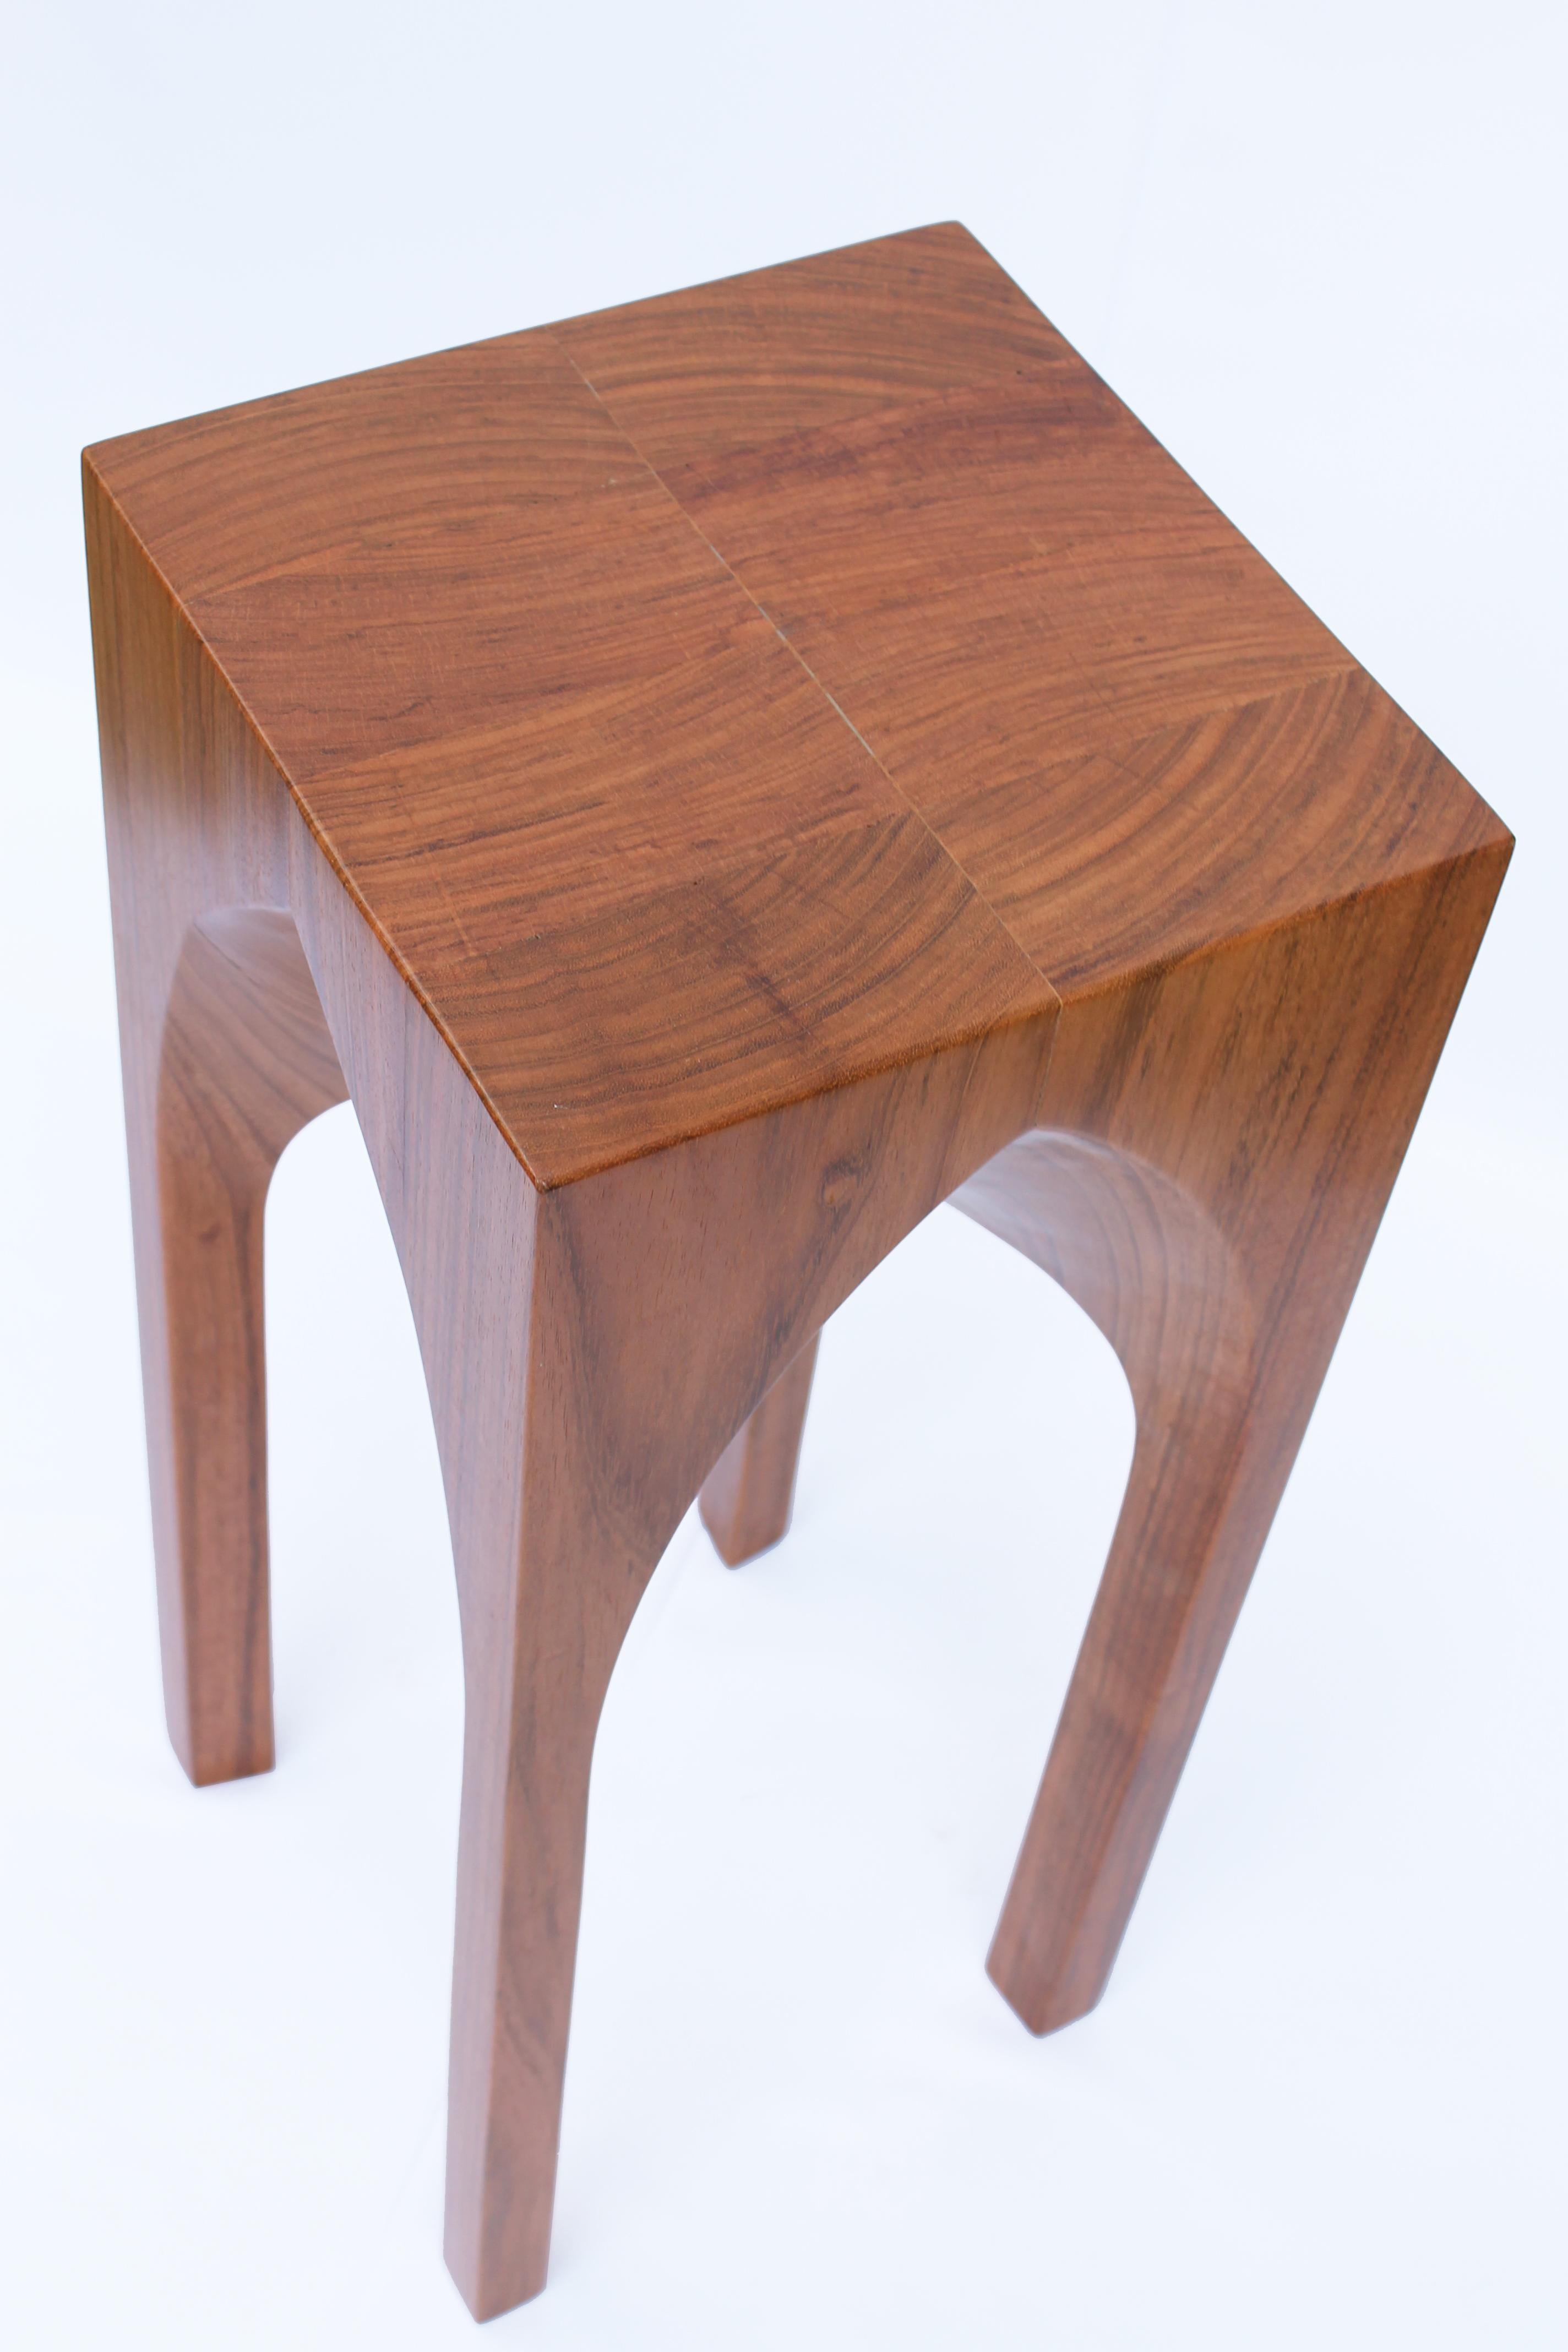 Brazilian Arch Side Table - Pointed Arch (Jatobá wood) For Sale